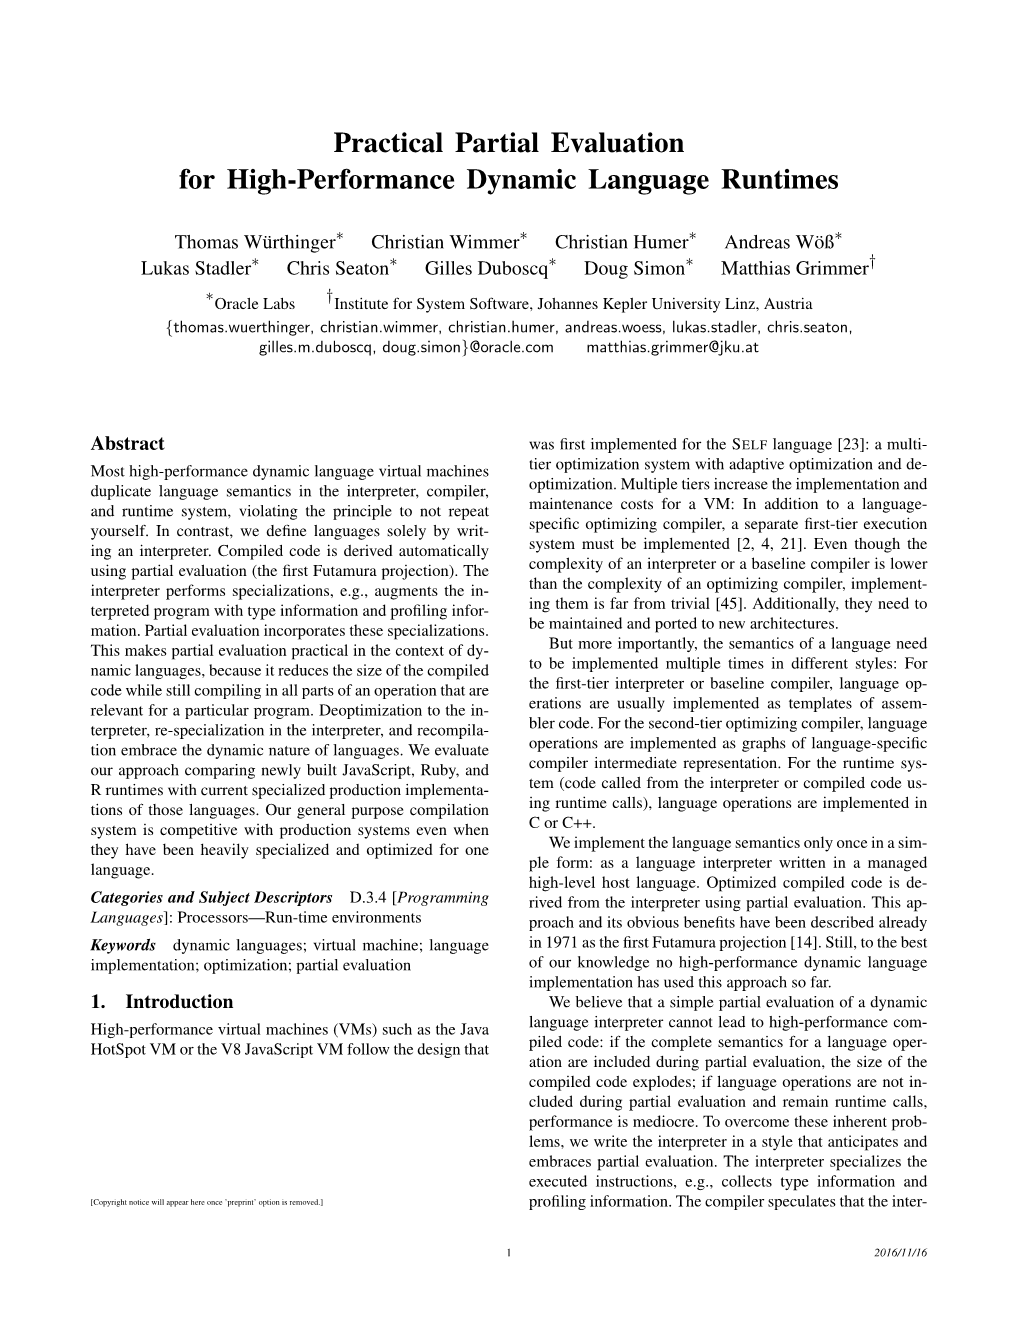 Practical Partial Evaluation for High-Performance Dynamic Language Runtimes